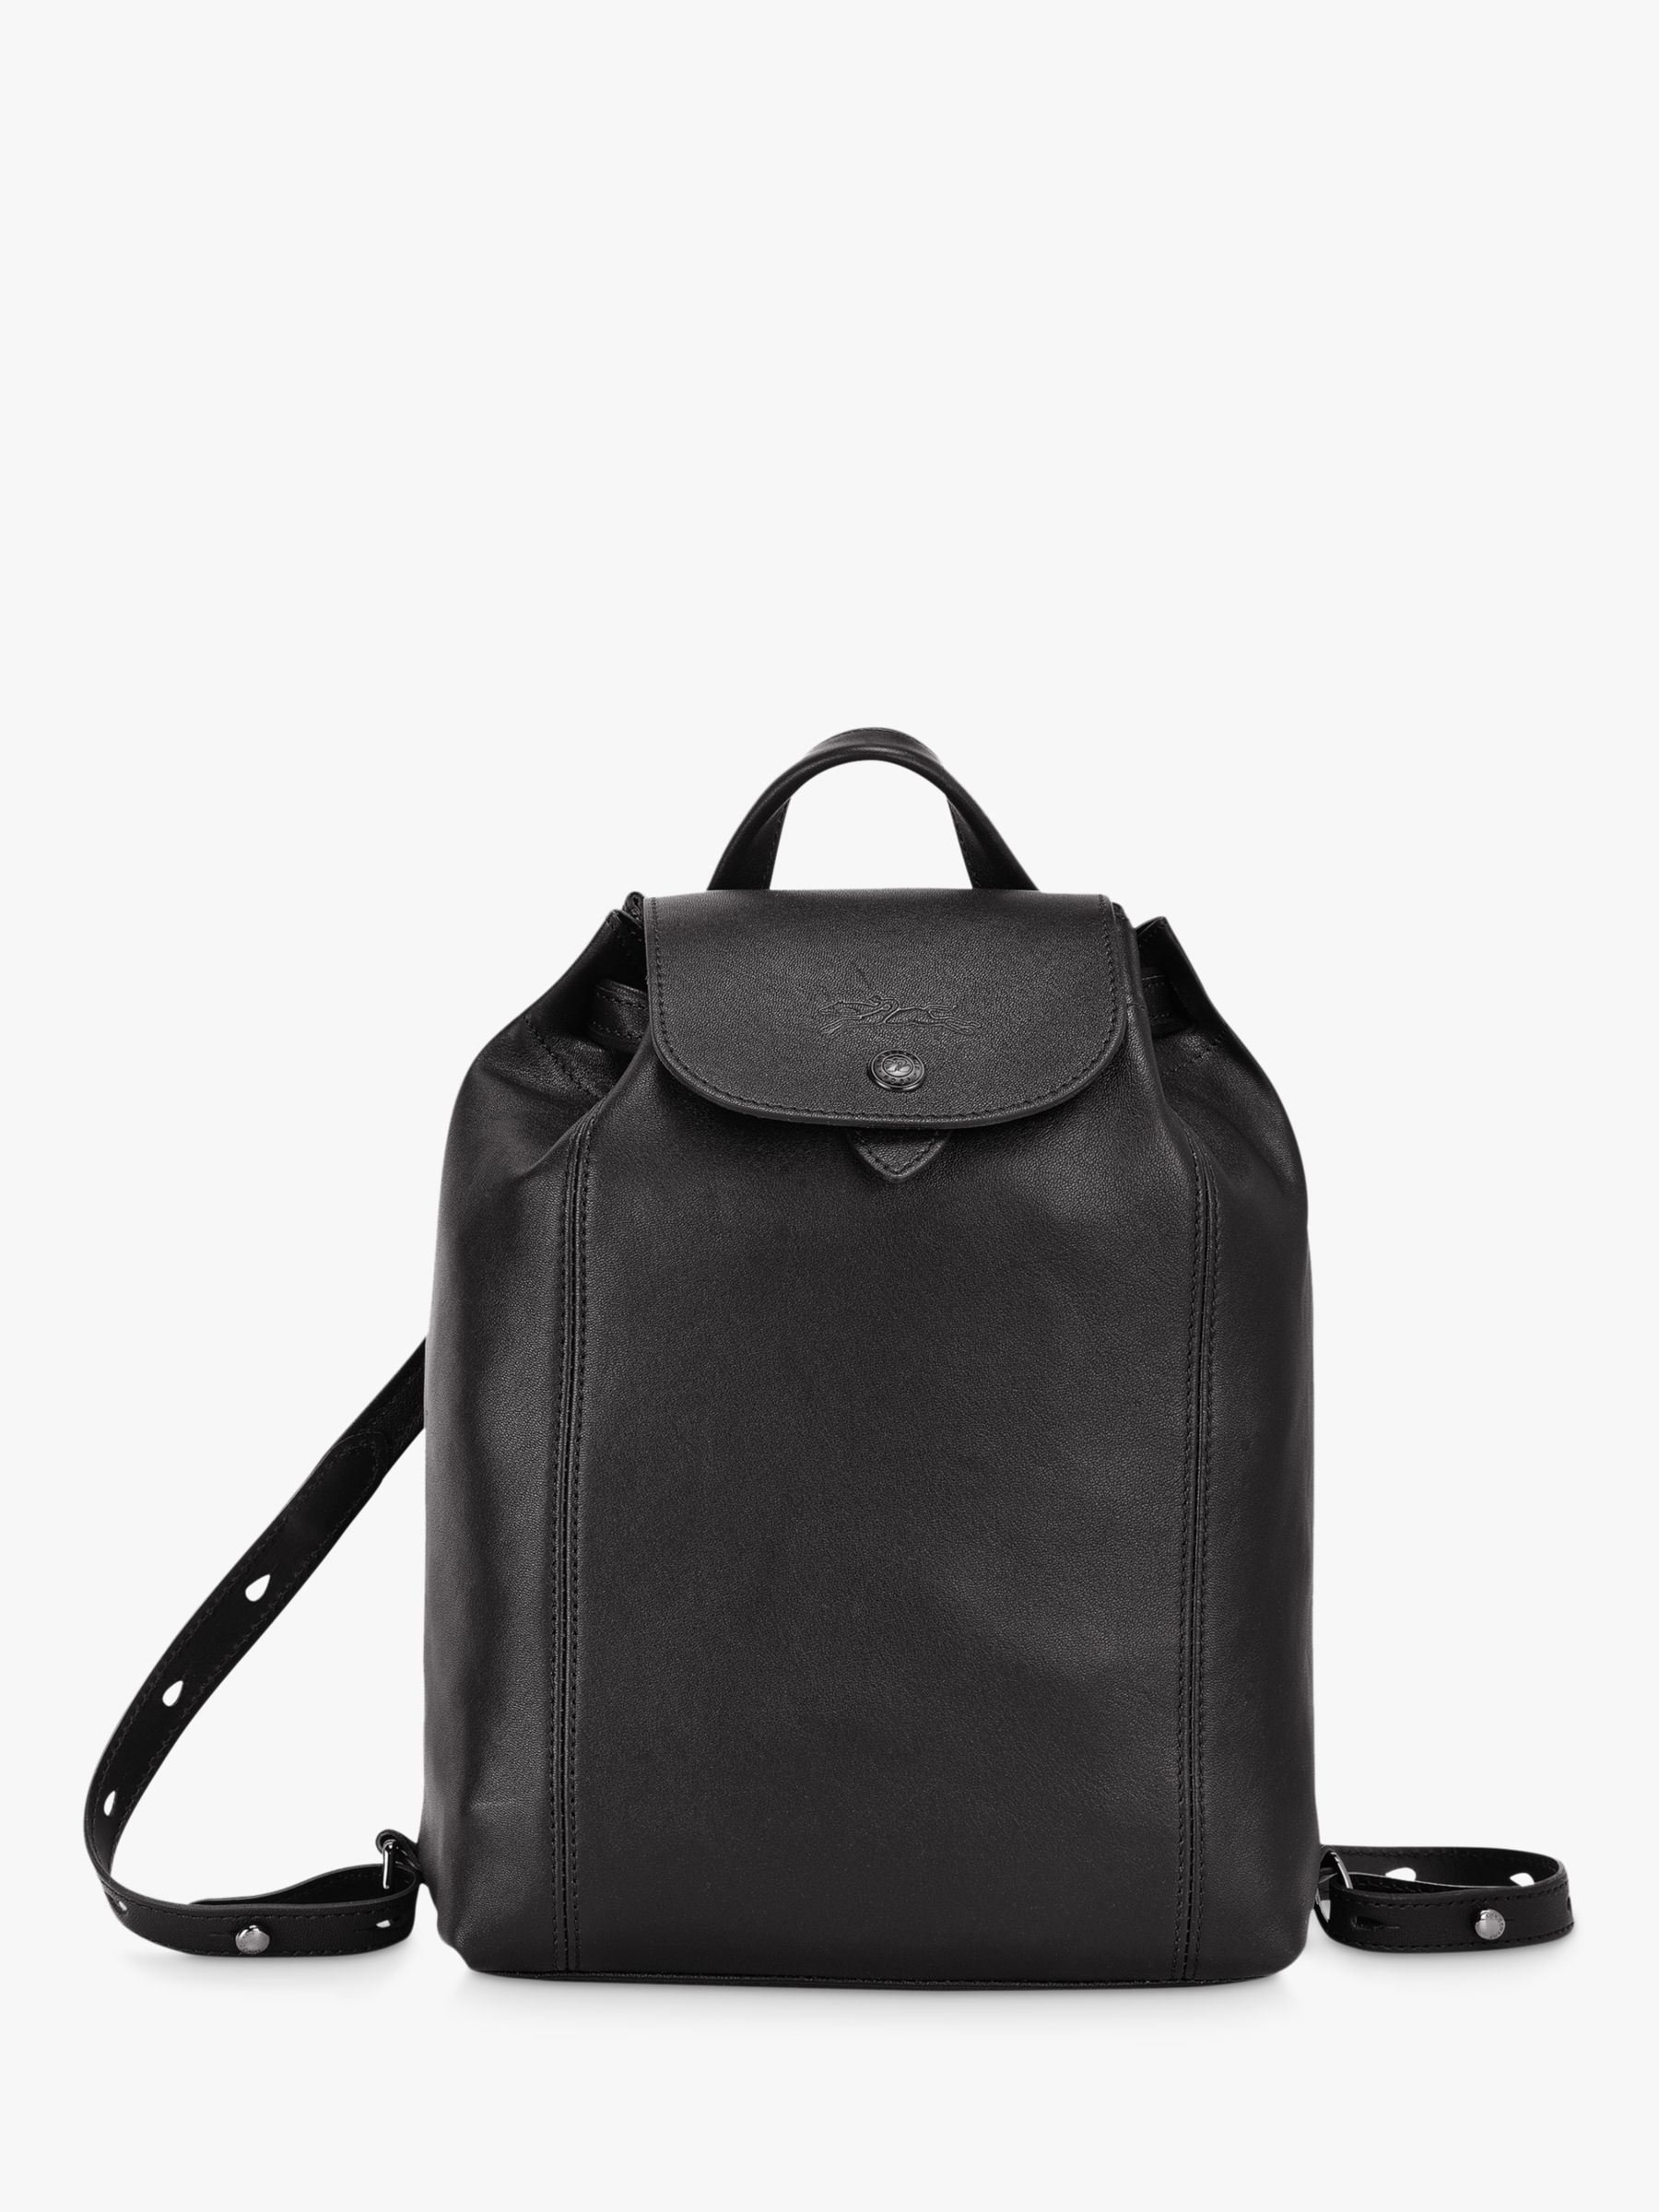 Longchamp Le Pliage Cuir Leather Backpack, Black at John Lewis & Partners